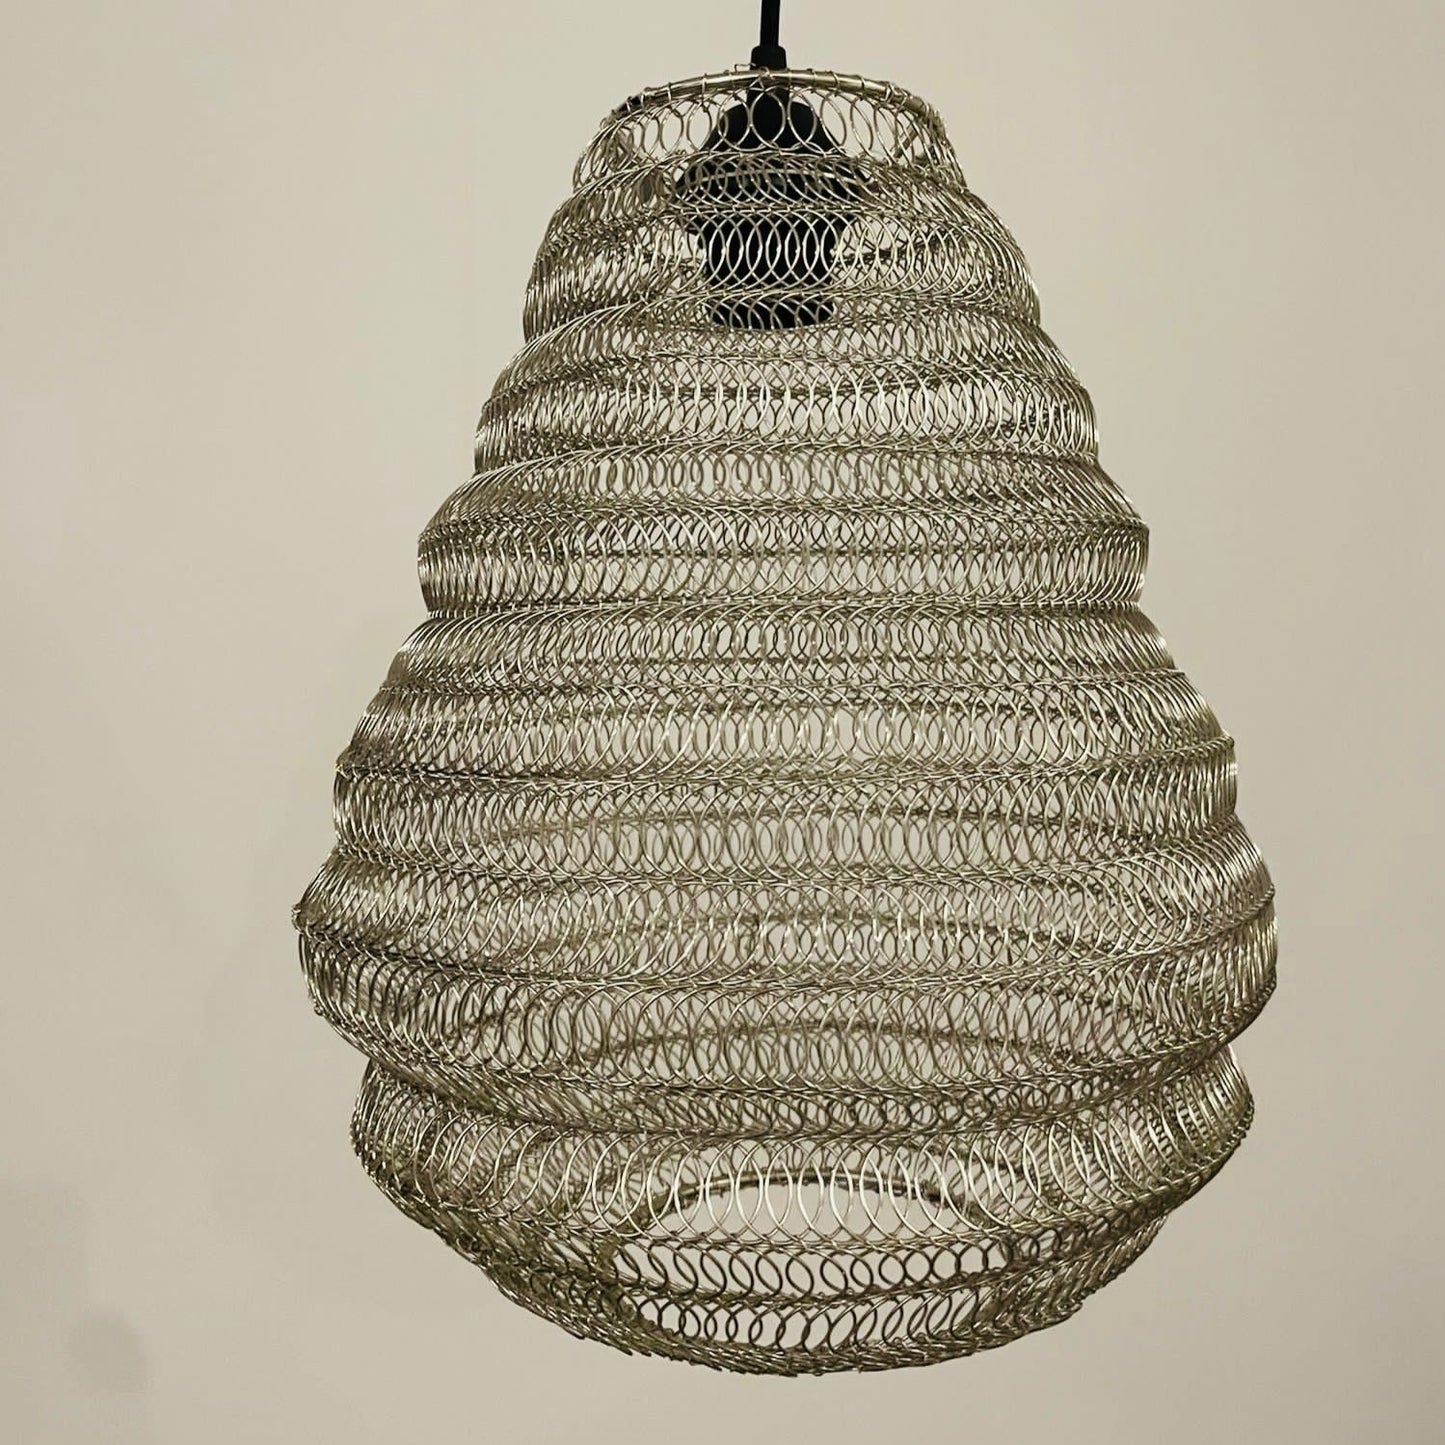 Bring a Moroccan twist to your home décor with the delicately crafted Casablanca ceiling light. Made in an intricate design from silver metal wire this large statement light would look fabulous in both living and dining spaces, as well as bedrooms. When switched on the light shines through the shade creating a spectacular pattern on the ceiling and walls.